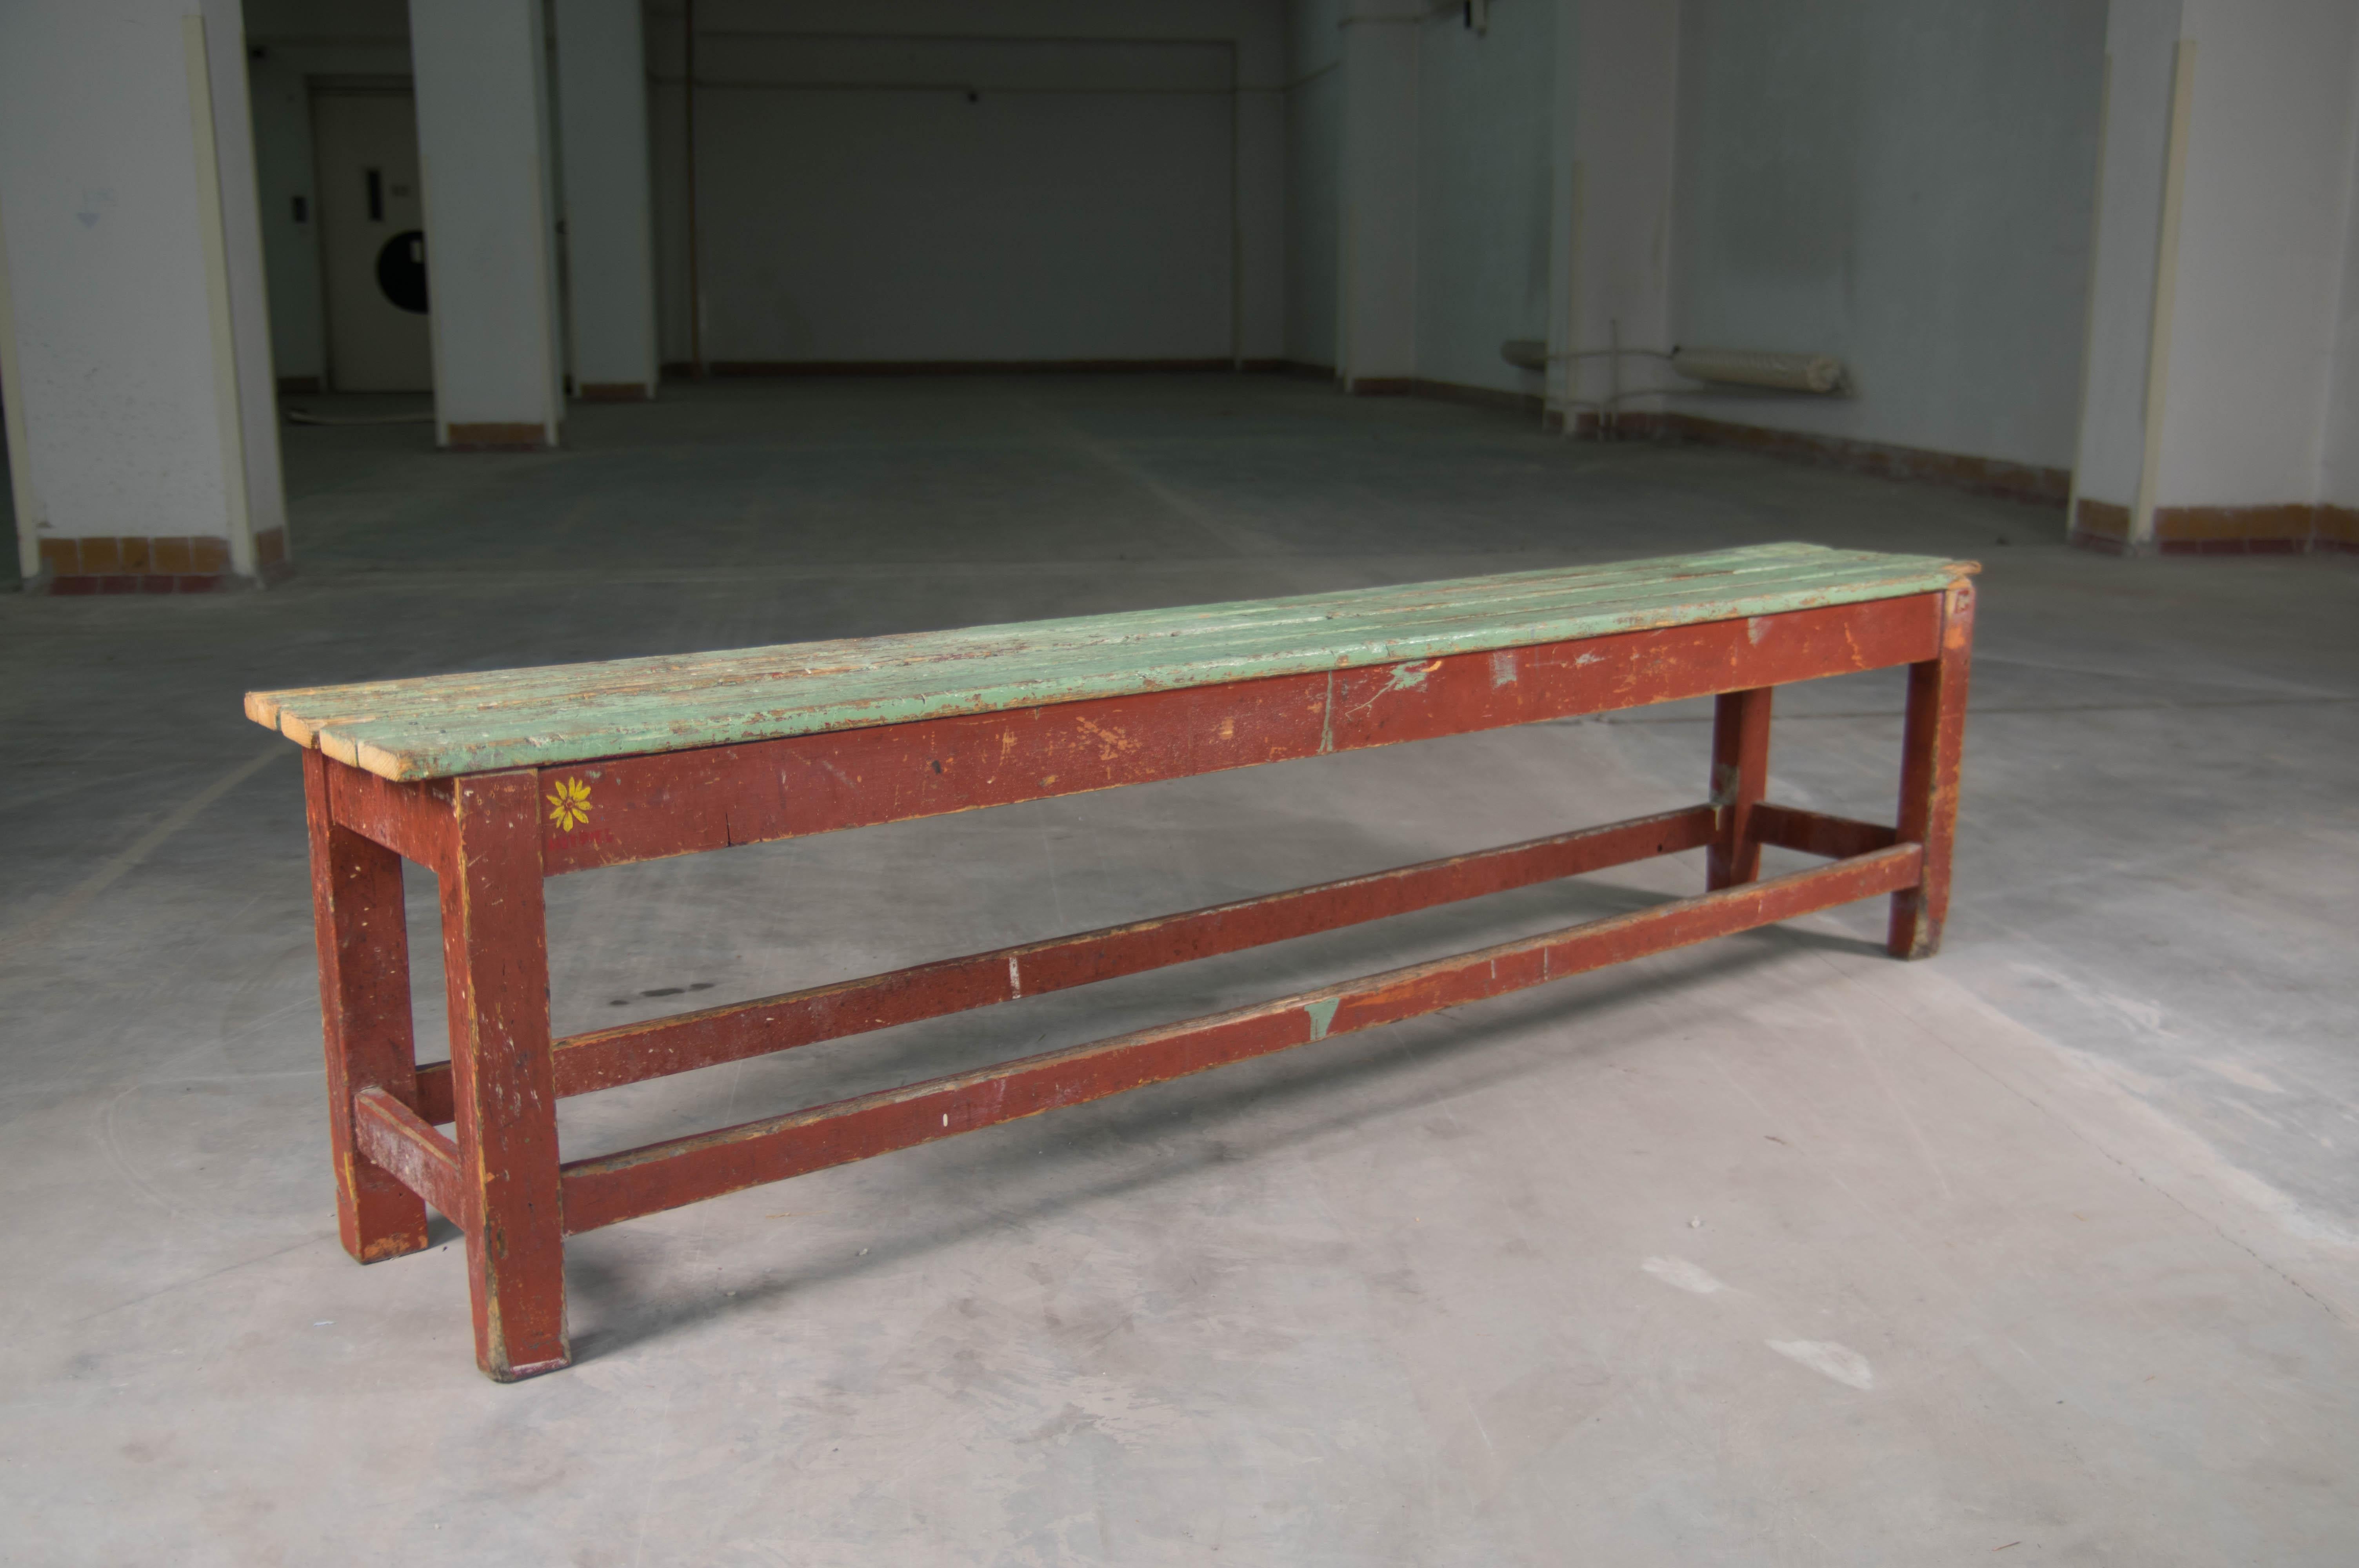 Bench from Bauhaus factory. Original condition with beautiful patina. Sturdy and stabile. 
Shipping to Continental US circa $780.